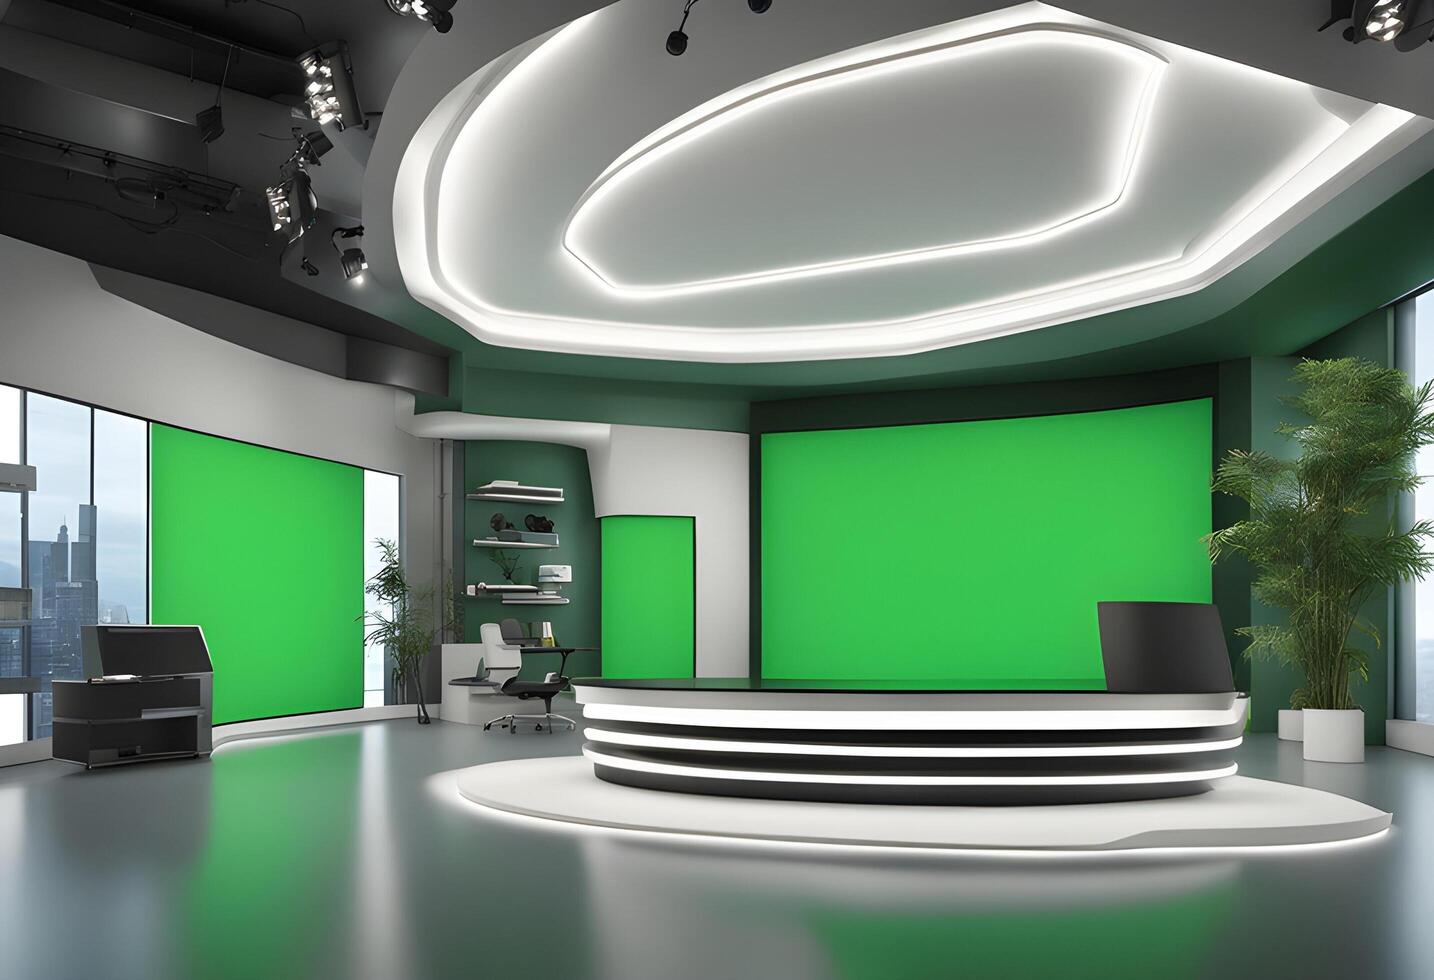 Studio The perfect backdrop for any green screen or chroma key production photo